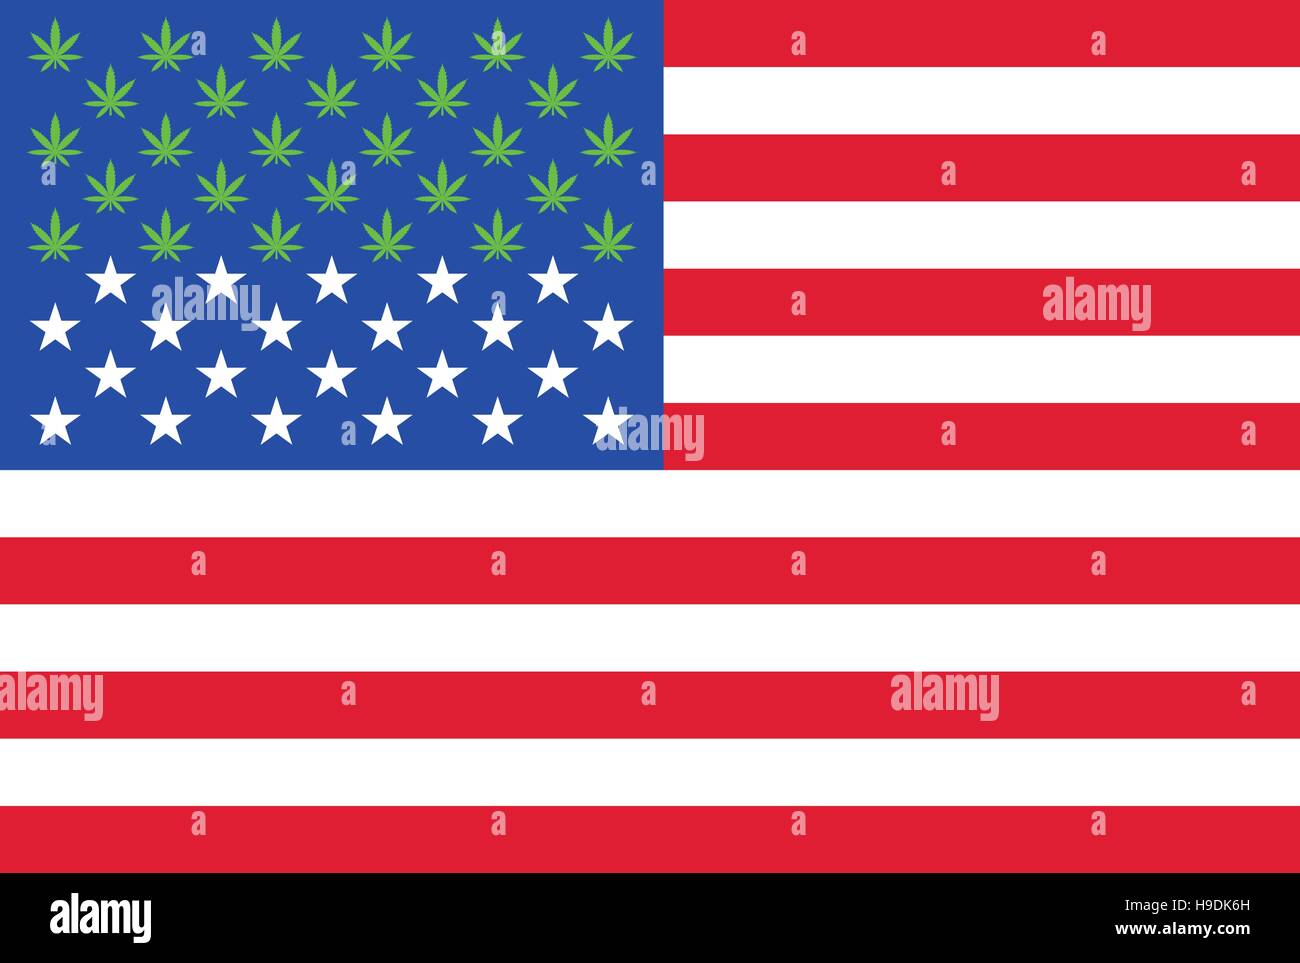 Cannabis now legal in 28 US states concept. United States of America flag with 28 marijuana leaves instead of stars infographic Stock Vector